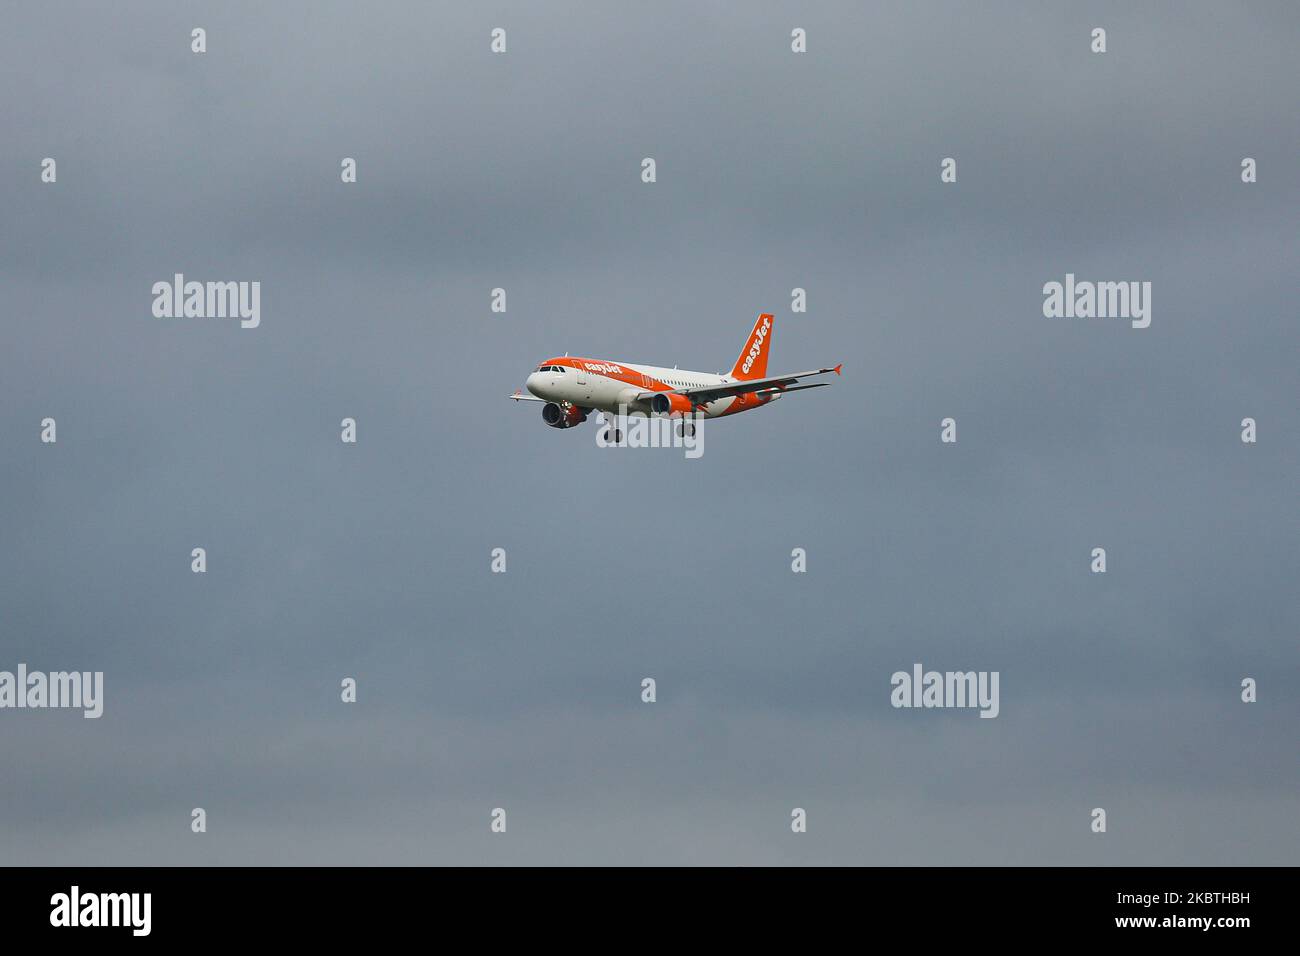 EasyJet Europe low cost airline Airbus A320 aircraft as seen on final approach on final flying, touch down, landing and breaking phase at Amsterdam Schiphol AMS EHAM International Airport in the Netherlands on July 2, 2020. The British budget carrier with headquarters in London, U2 Easy Jet is flying an all airbus fleet. The specific narrow body airplane has the registration OE-INP and 2x CFMI engines and is the branch part of EasyJet Europe Airline BmbH fleet EC EJU ALPINE based in Vienna. (Photo by Nicolas Economou/NurPhoto) Stock Photo